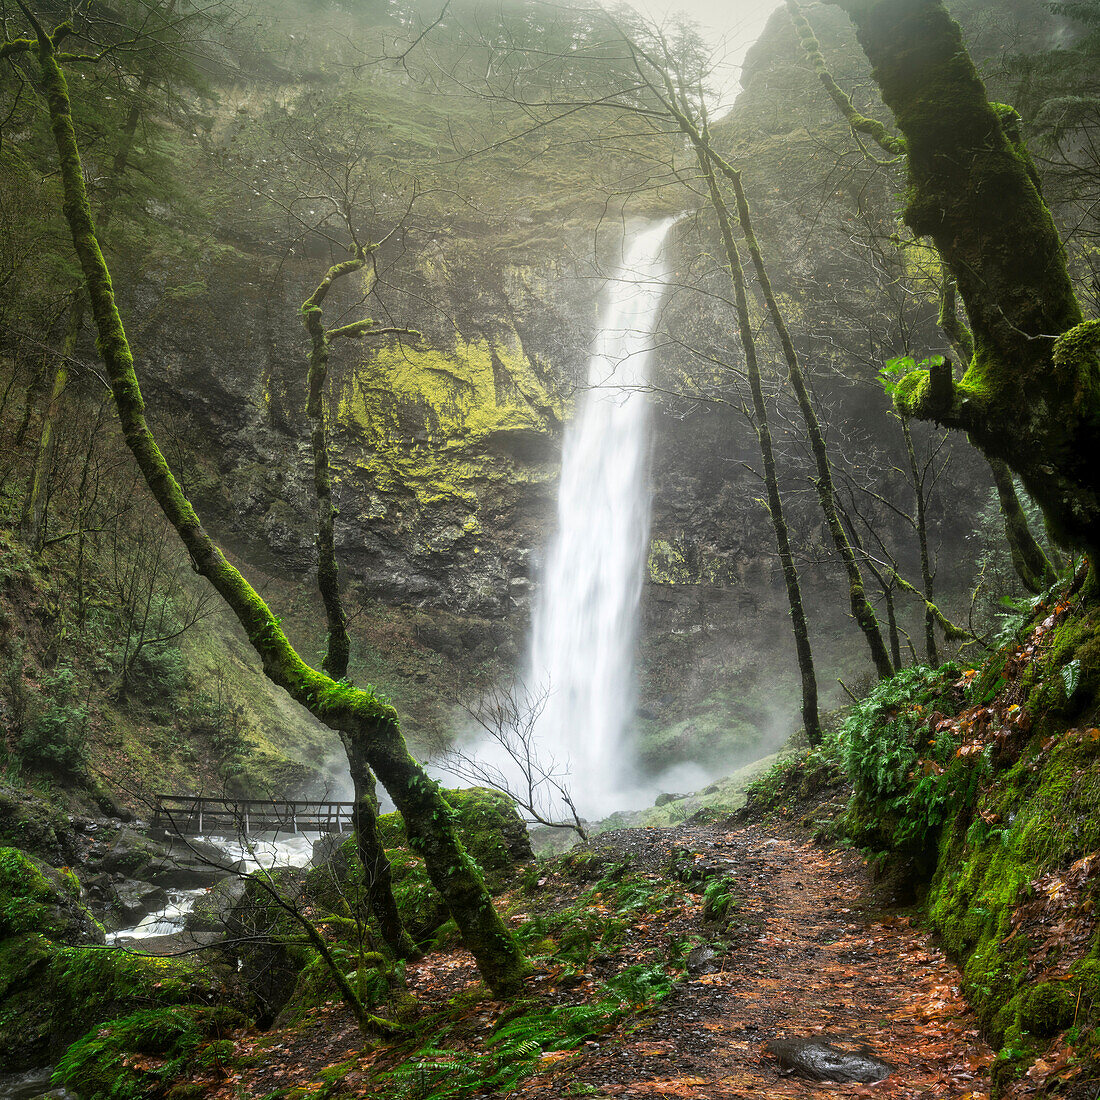 Waterfall pouring over cliff in rocky forest, Multnomah, Oregon, United States